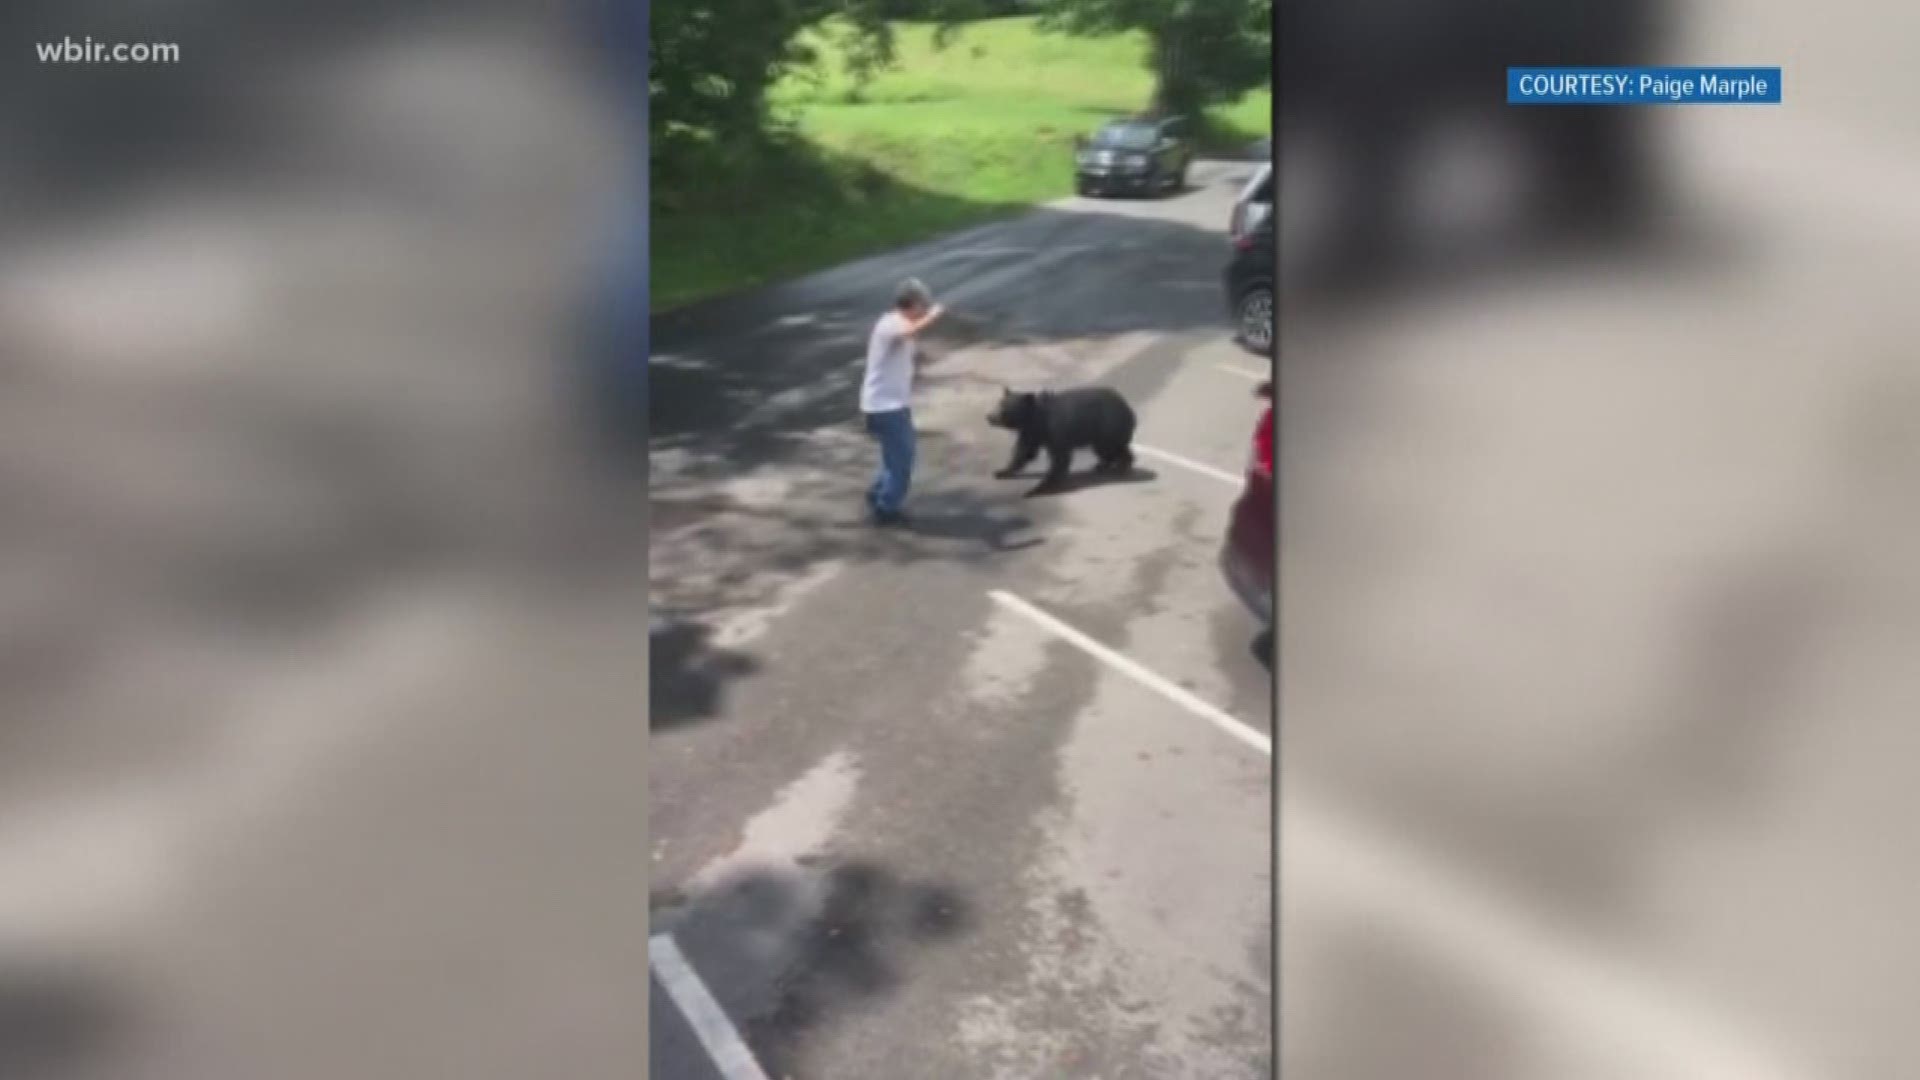 The video shows a man approaching a black bear's cubs several times before she lunges at him.